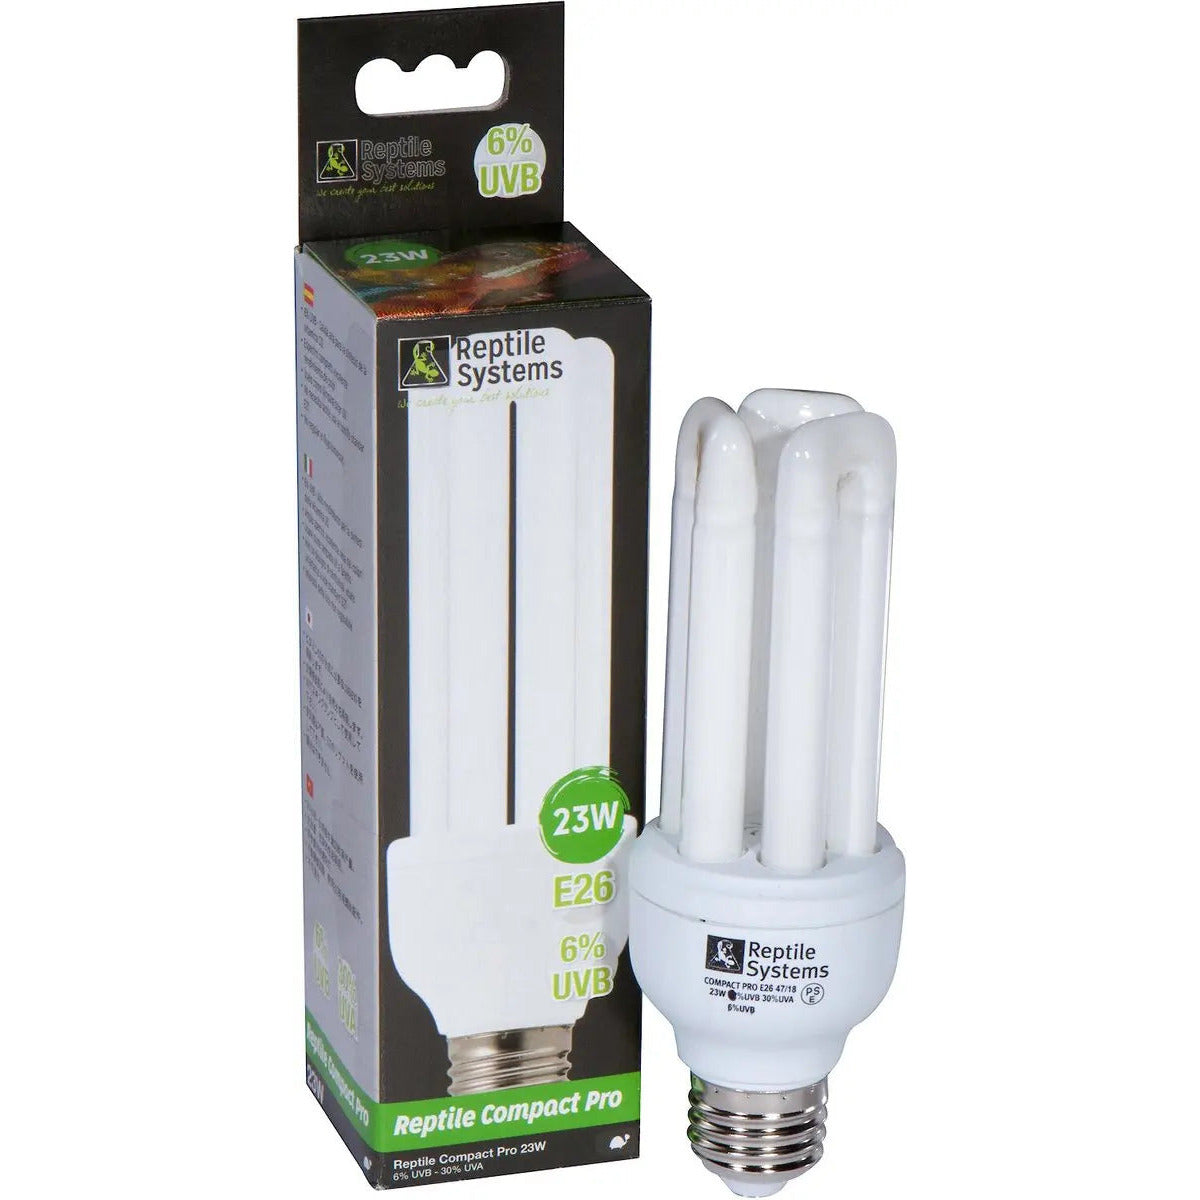 Reptile Systems Forest Compact Pro Basking Lamp 6% UVB Bulb Reptile Systems